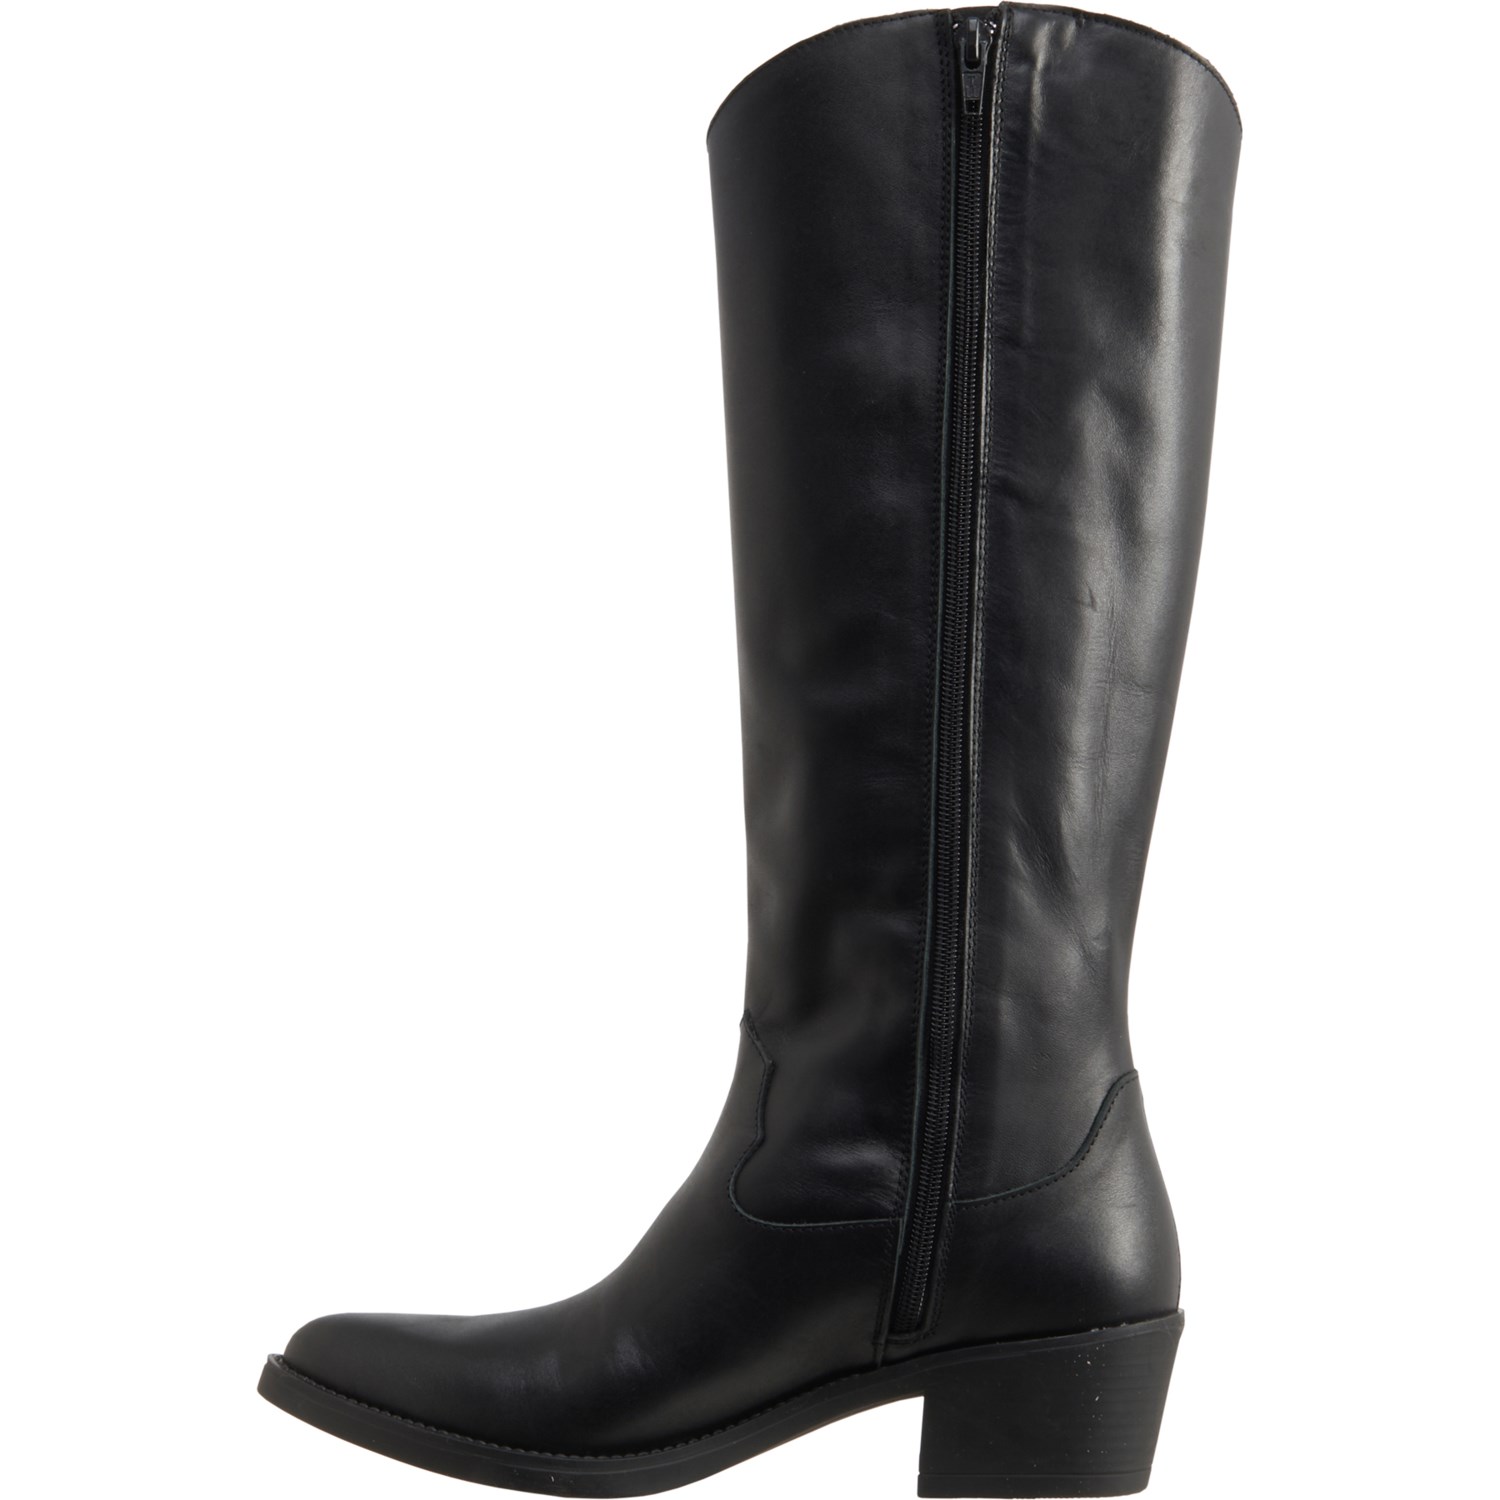 ENZO TESOTI Made in Spain Western Boots (For Women) - Save 55%